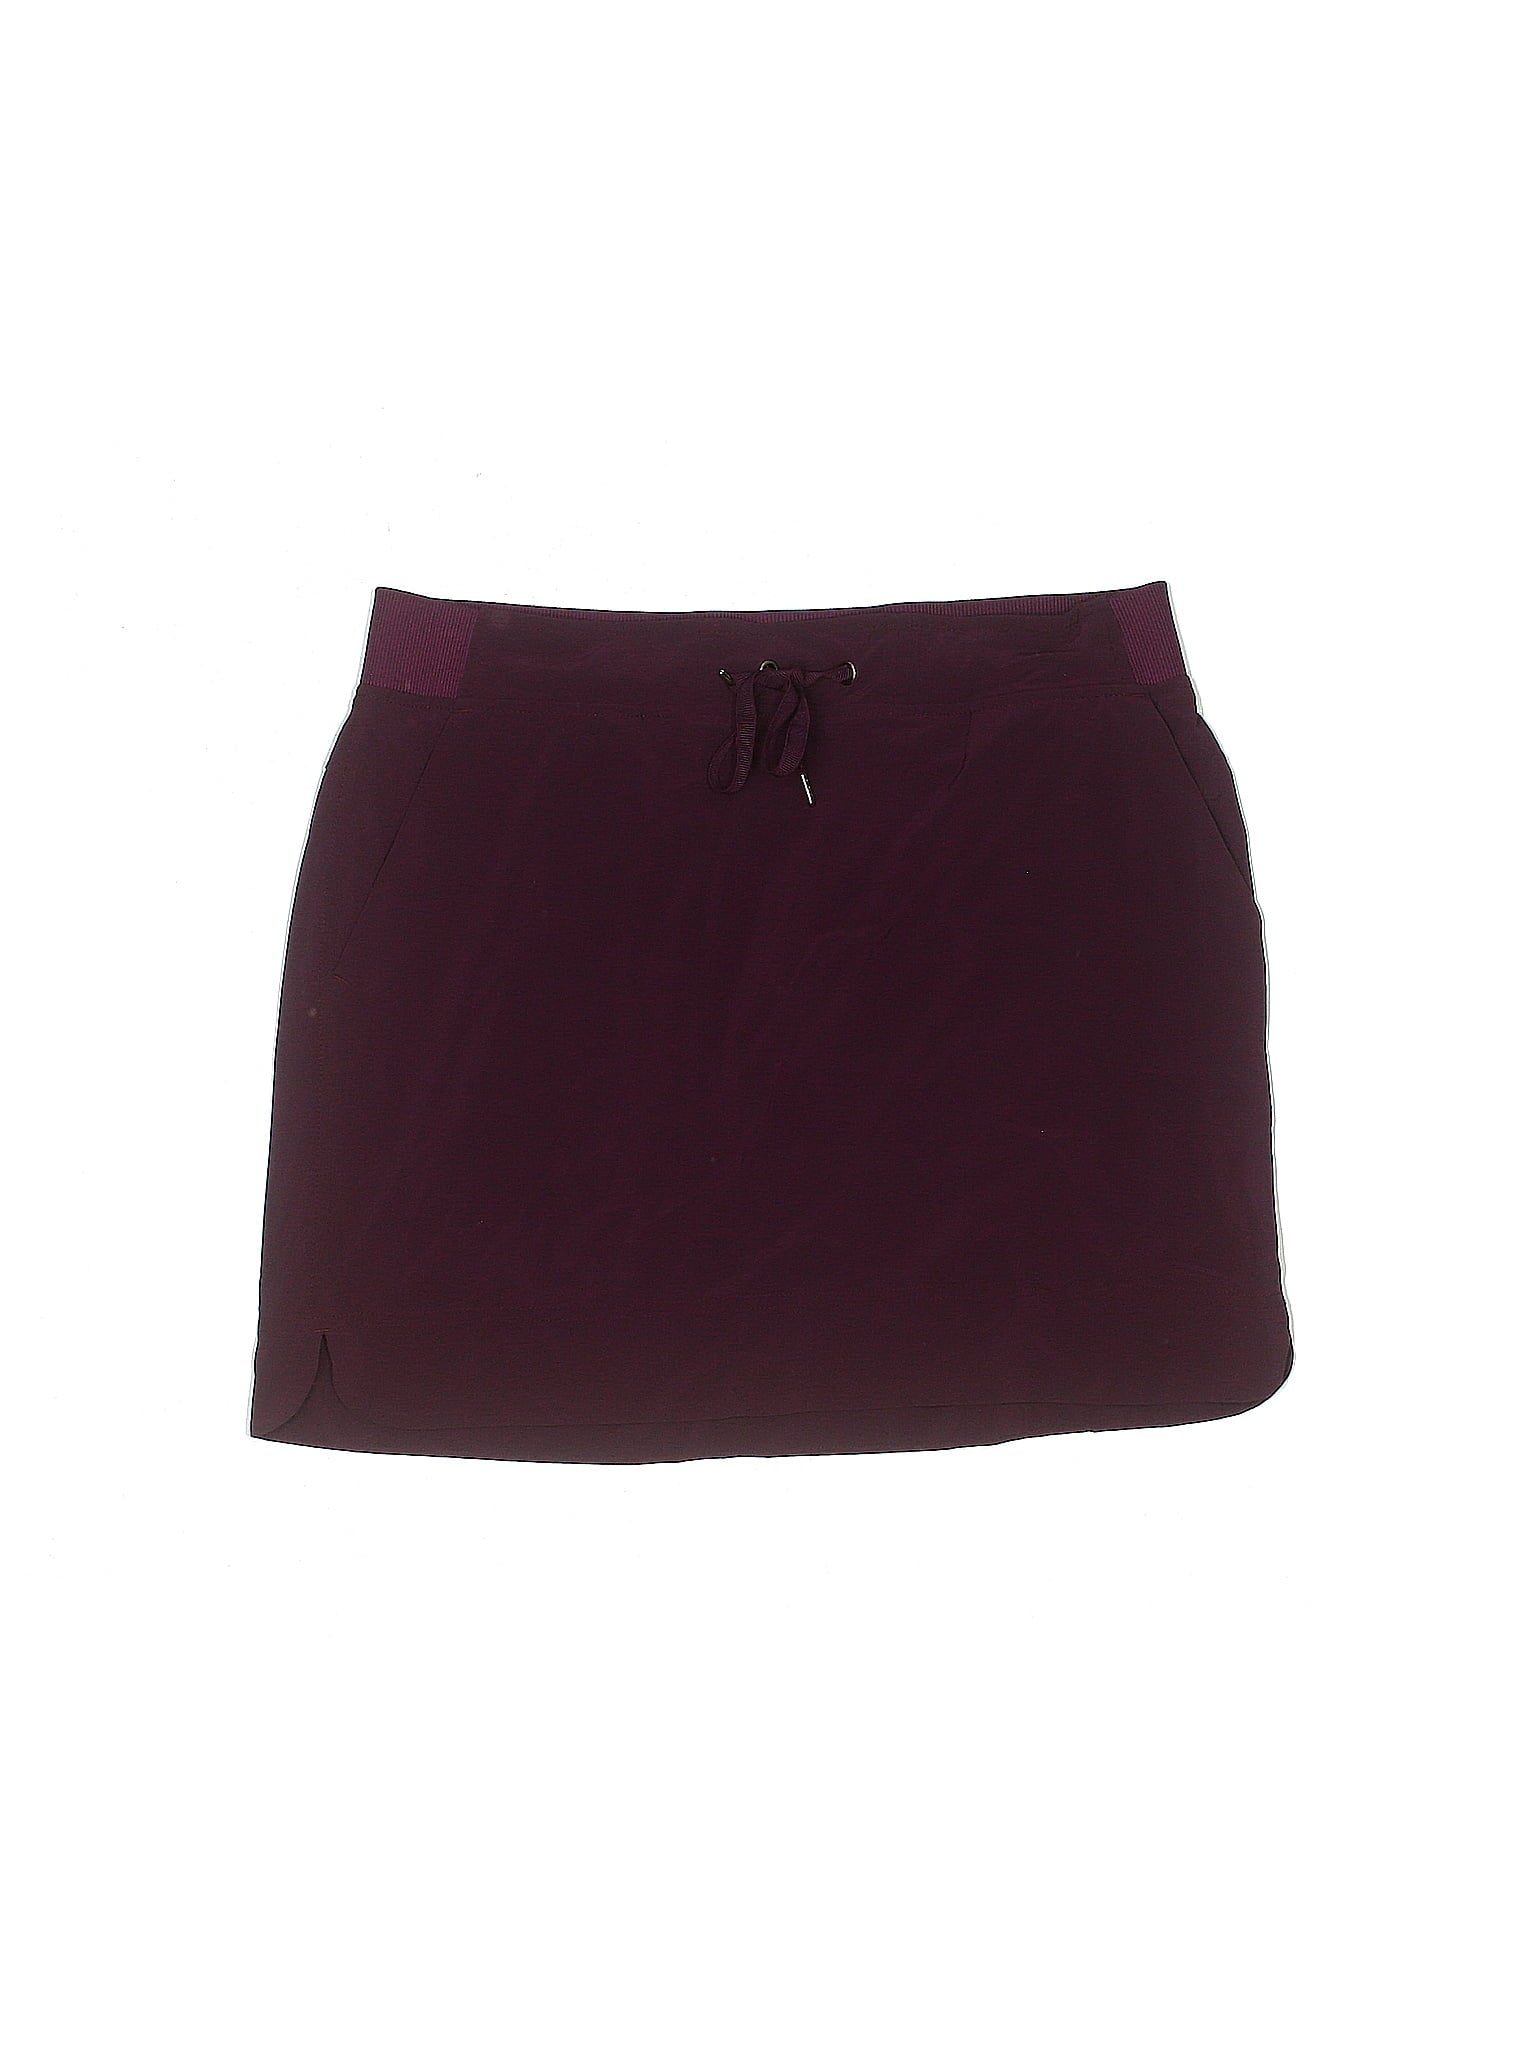 Active Skirt size - 12